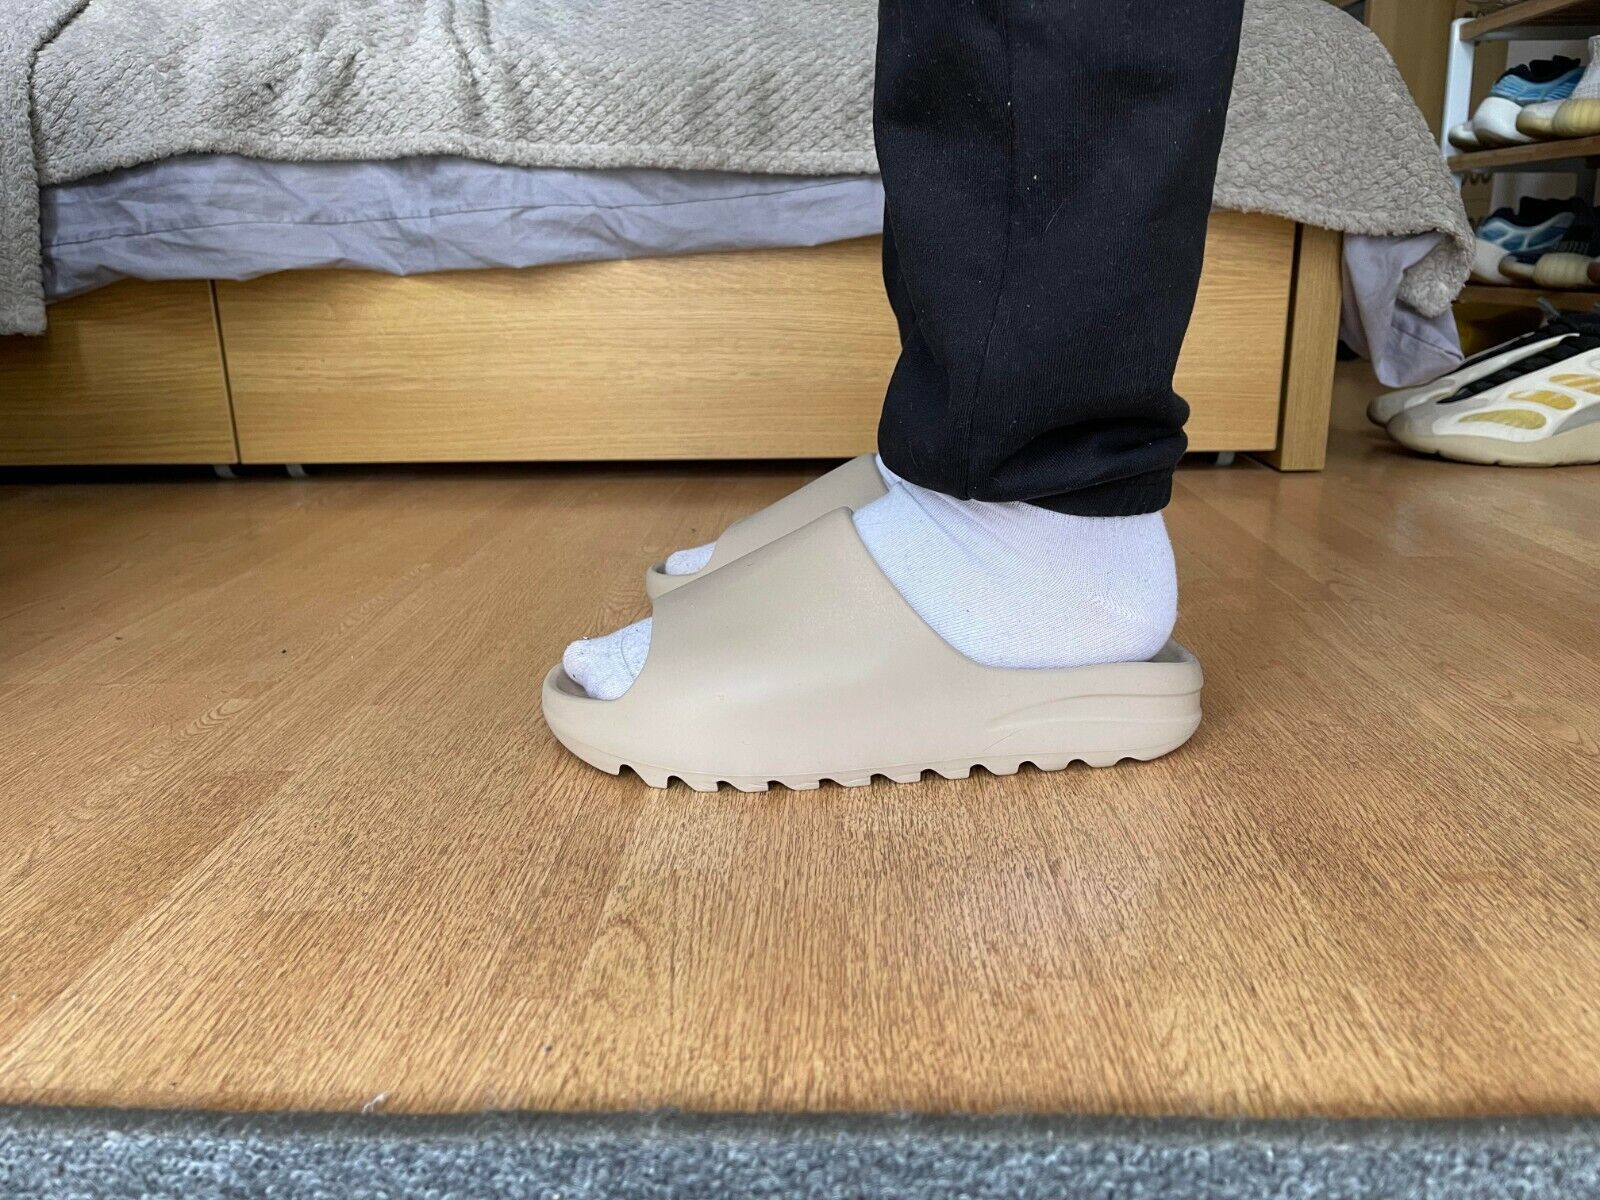 What You Need to Know About Yeezy Slide Sizing | eBay